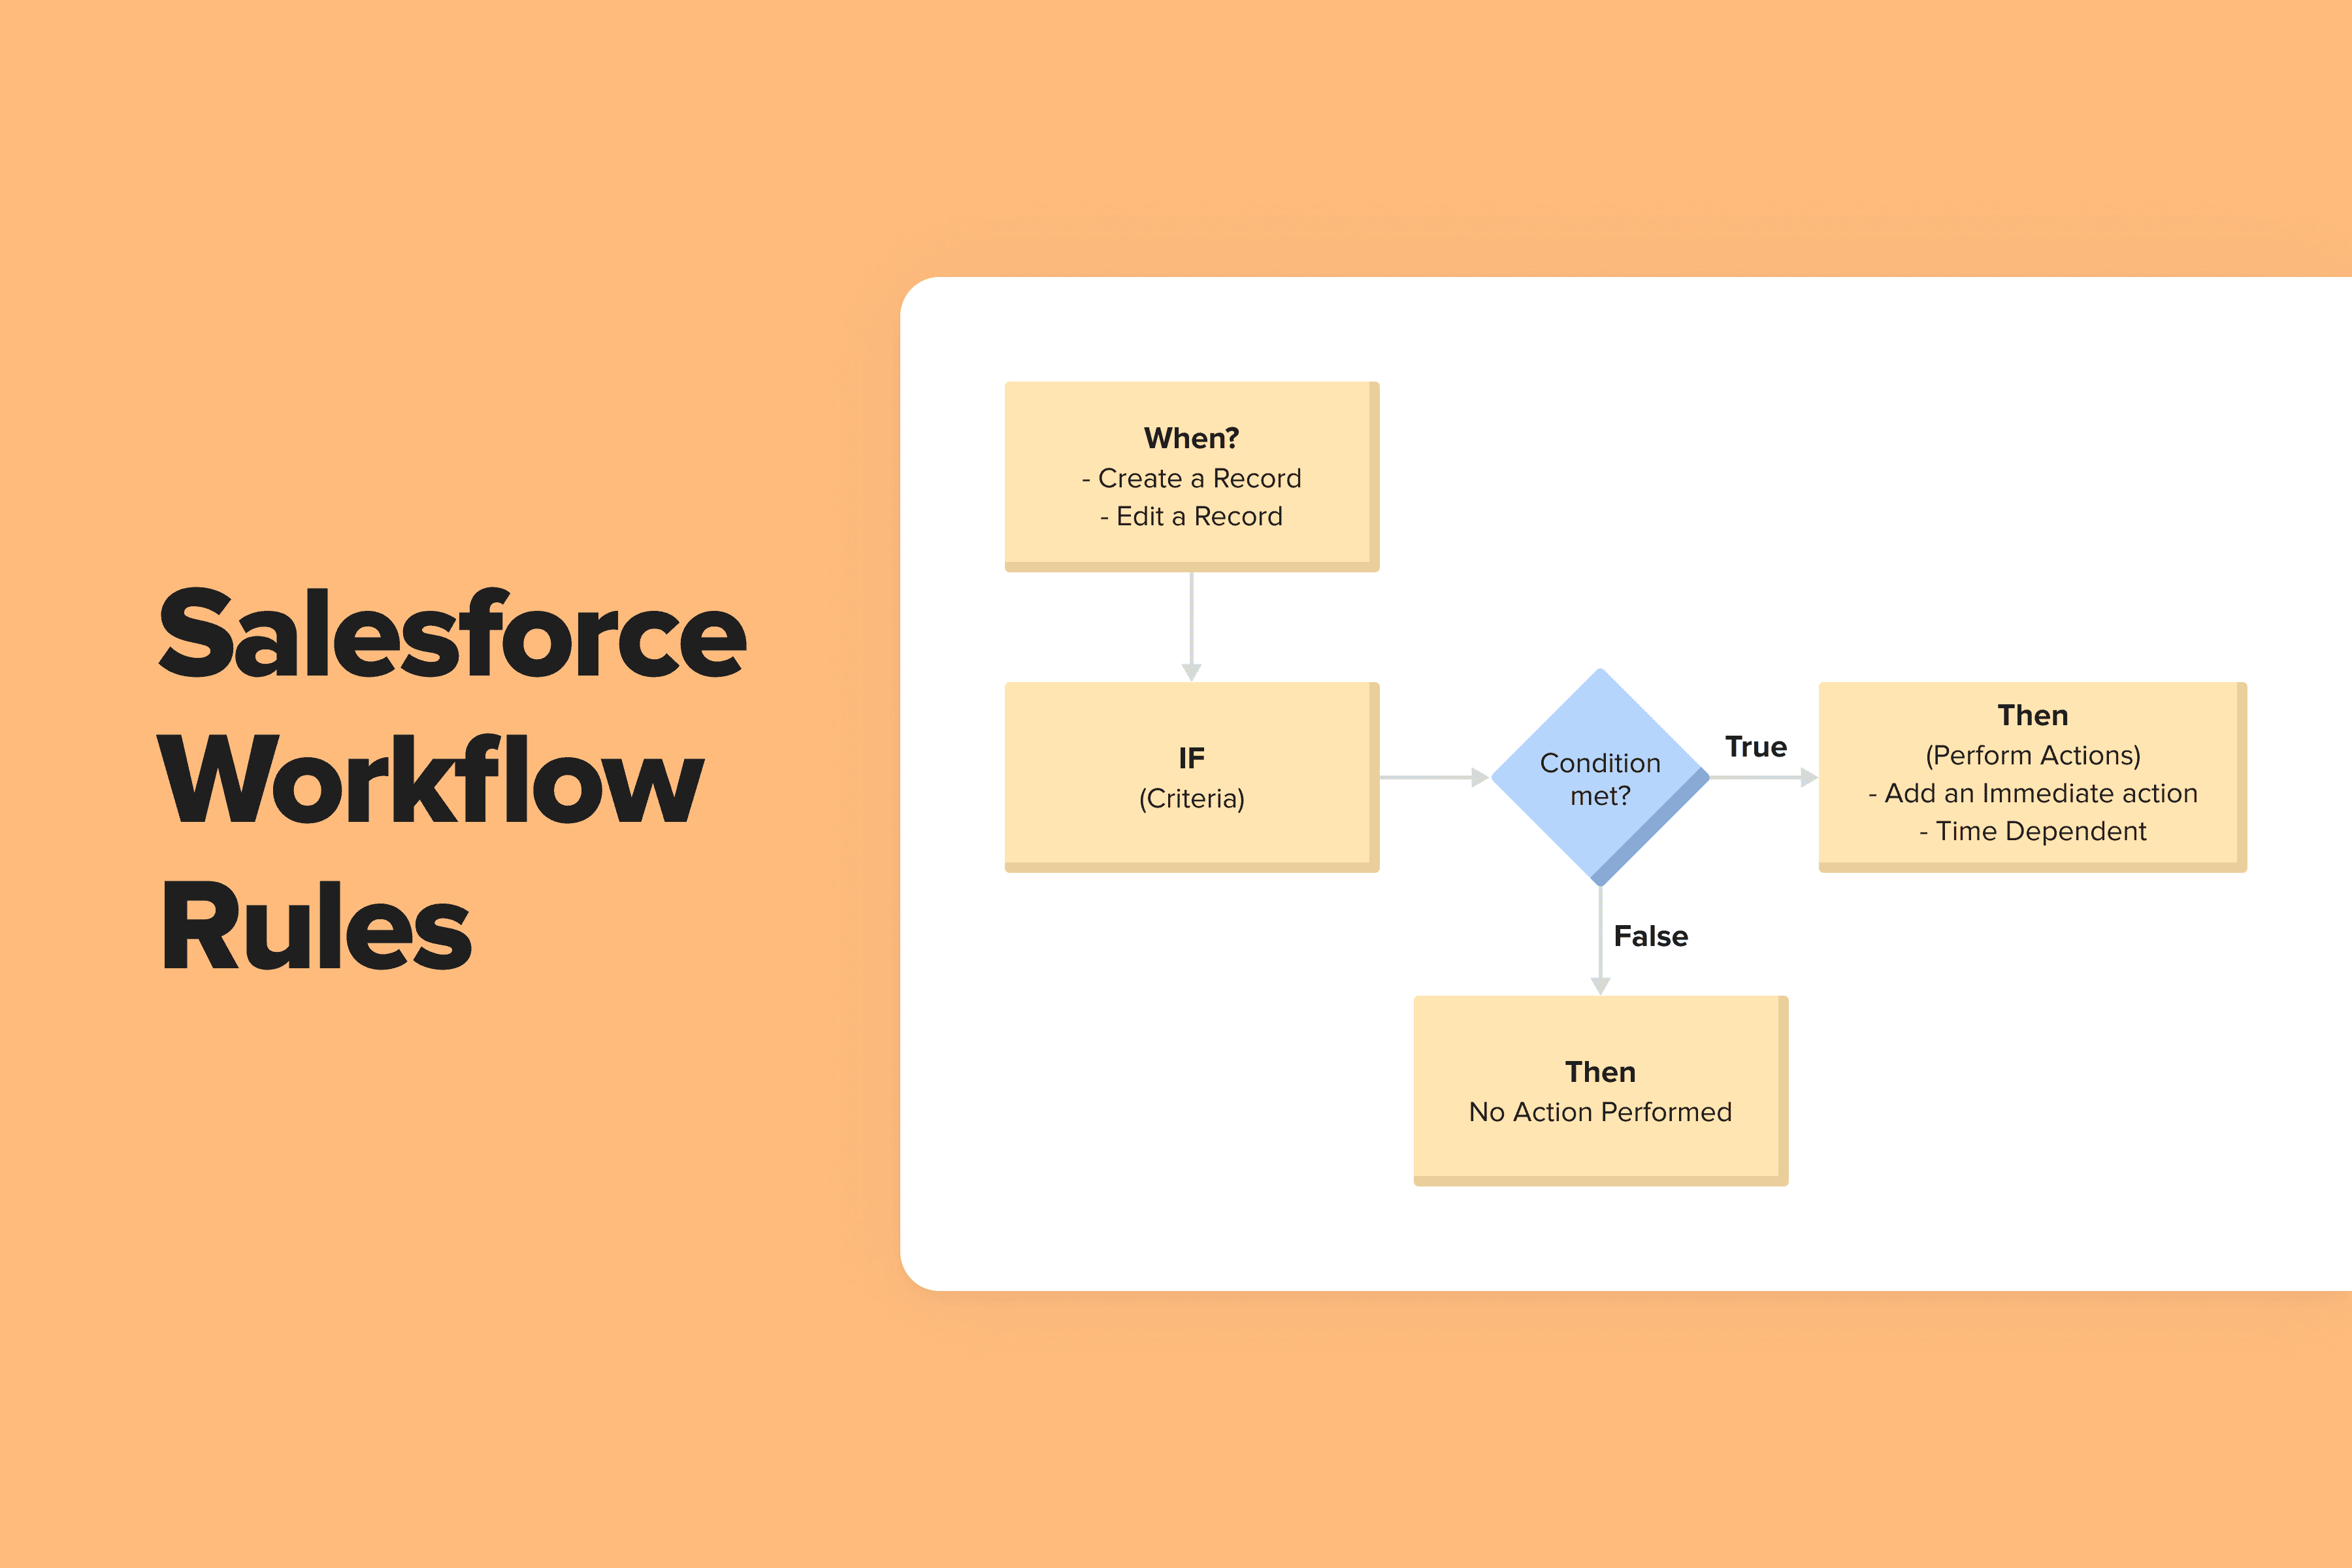 Salesforce Workflow Rules Explained